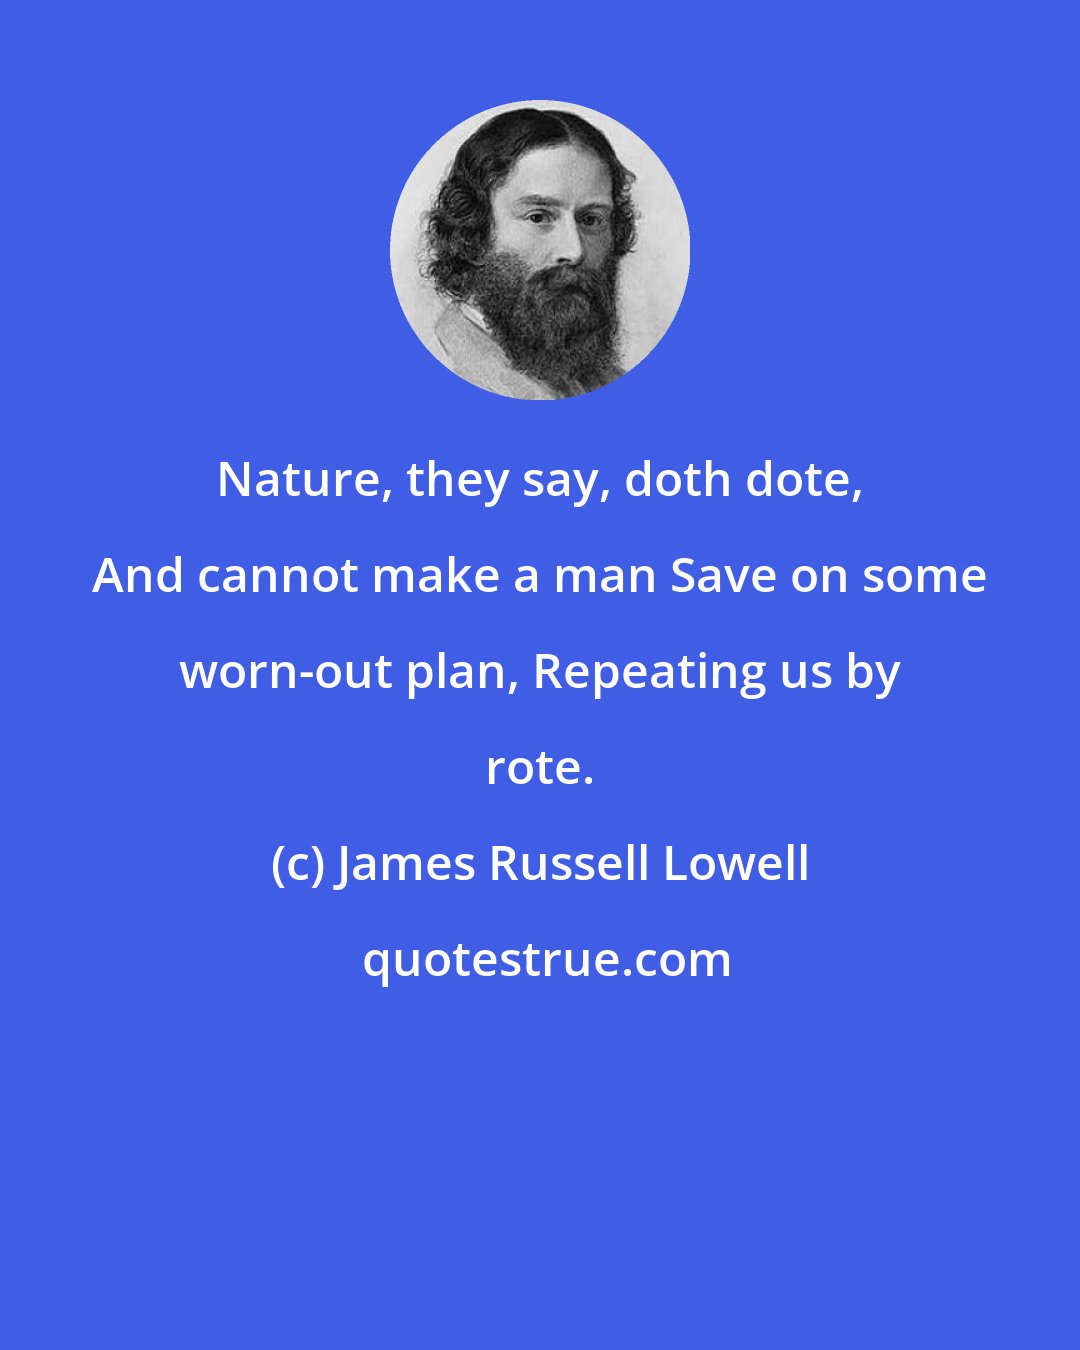 James Russell Lowell: Nature, they say, doth dote, And cannot make a man Save on some worn-out plan, Repeating us by rote.